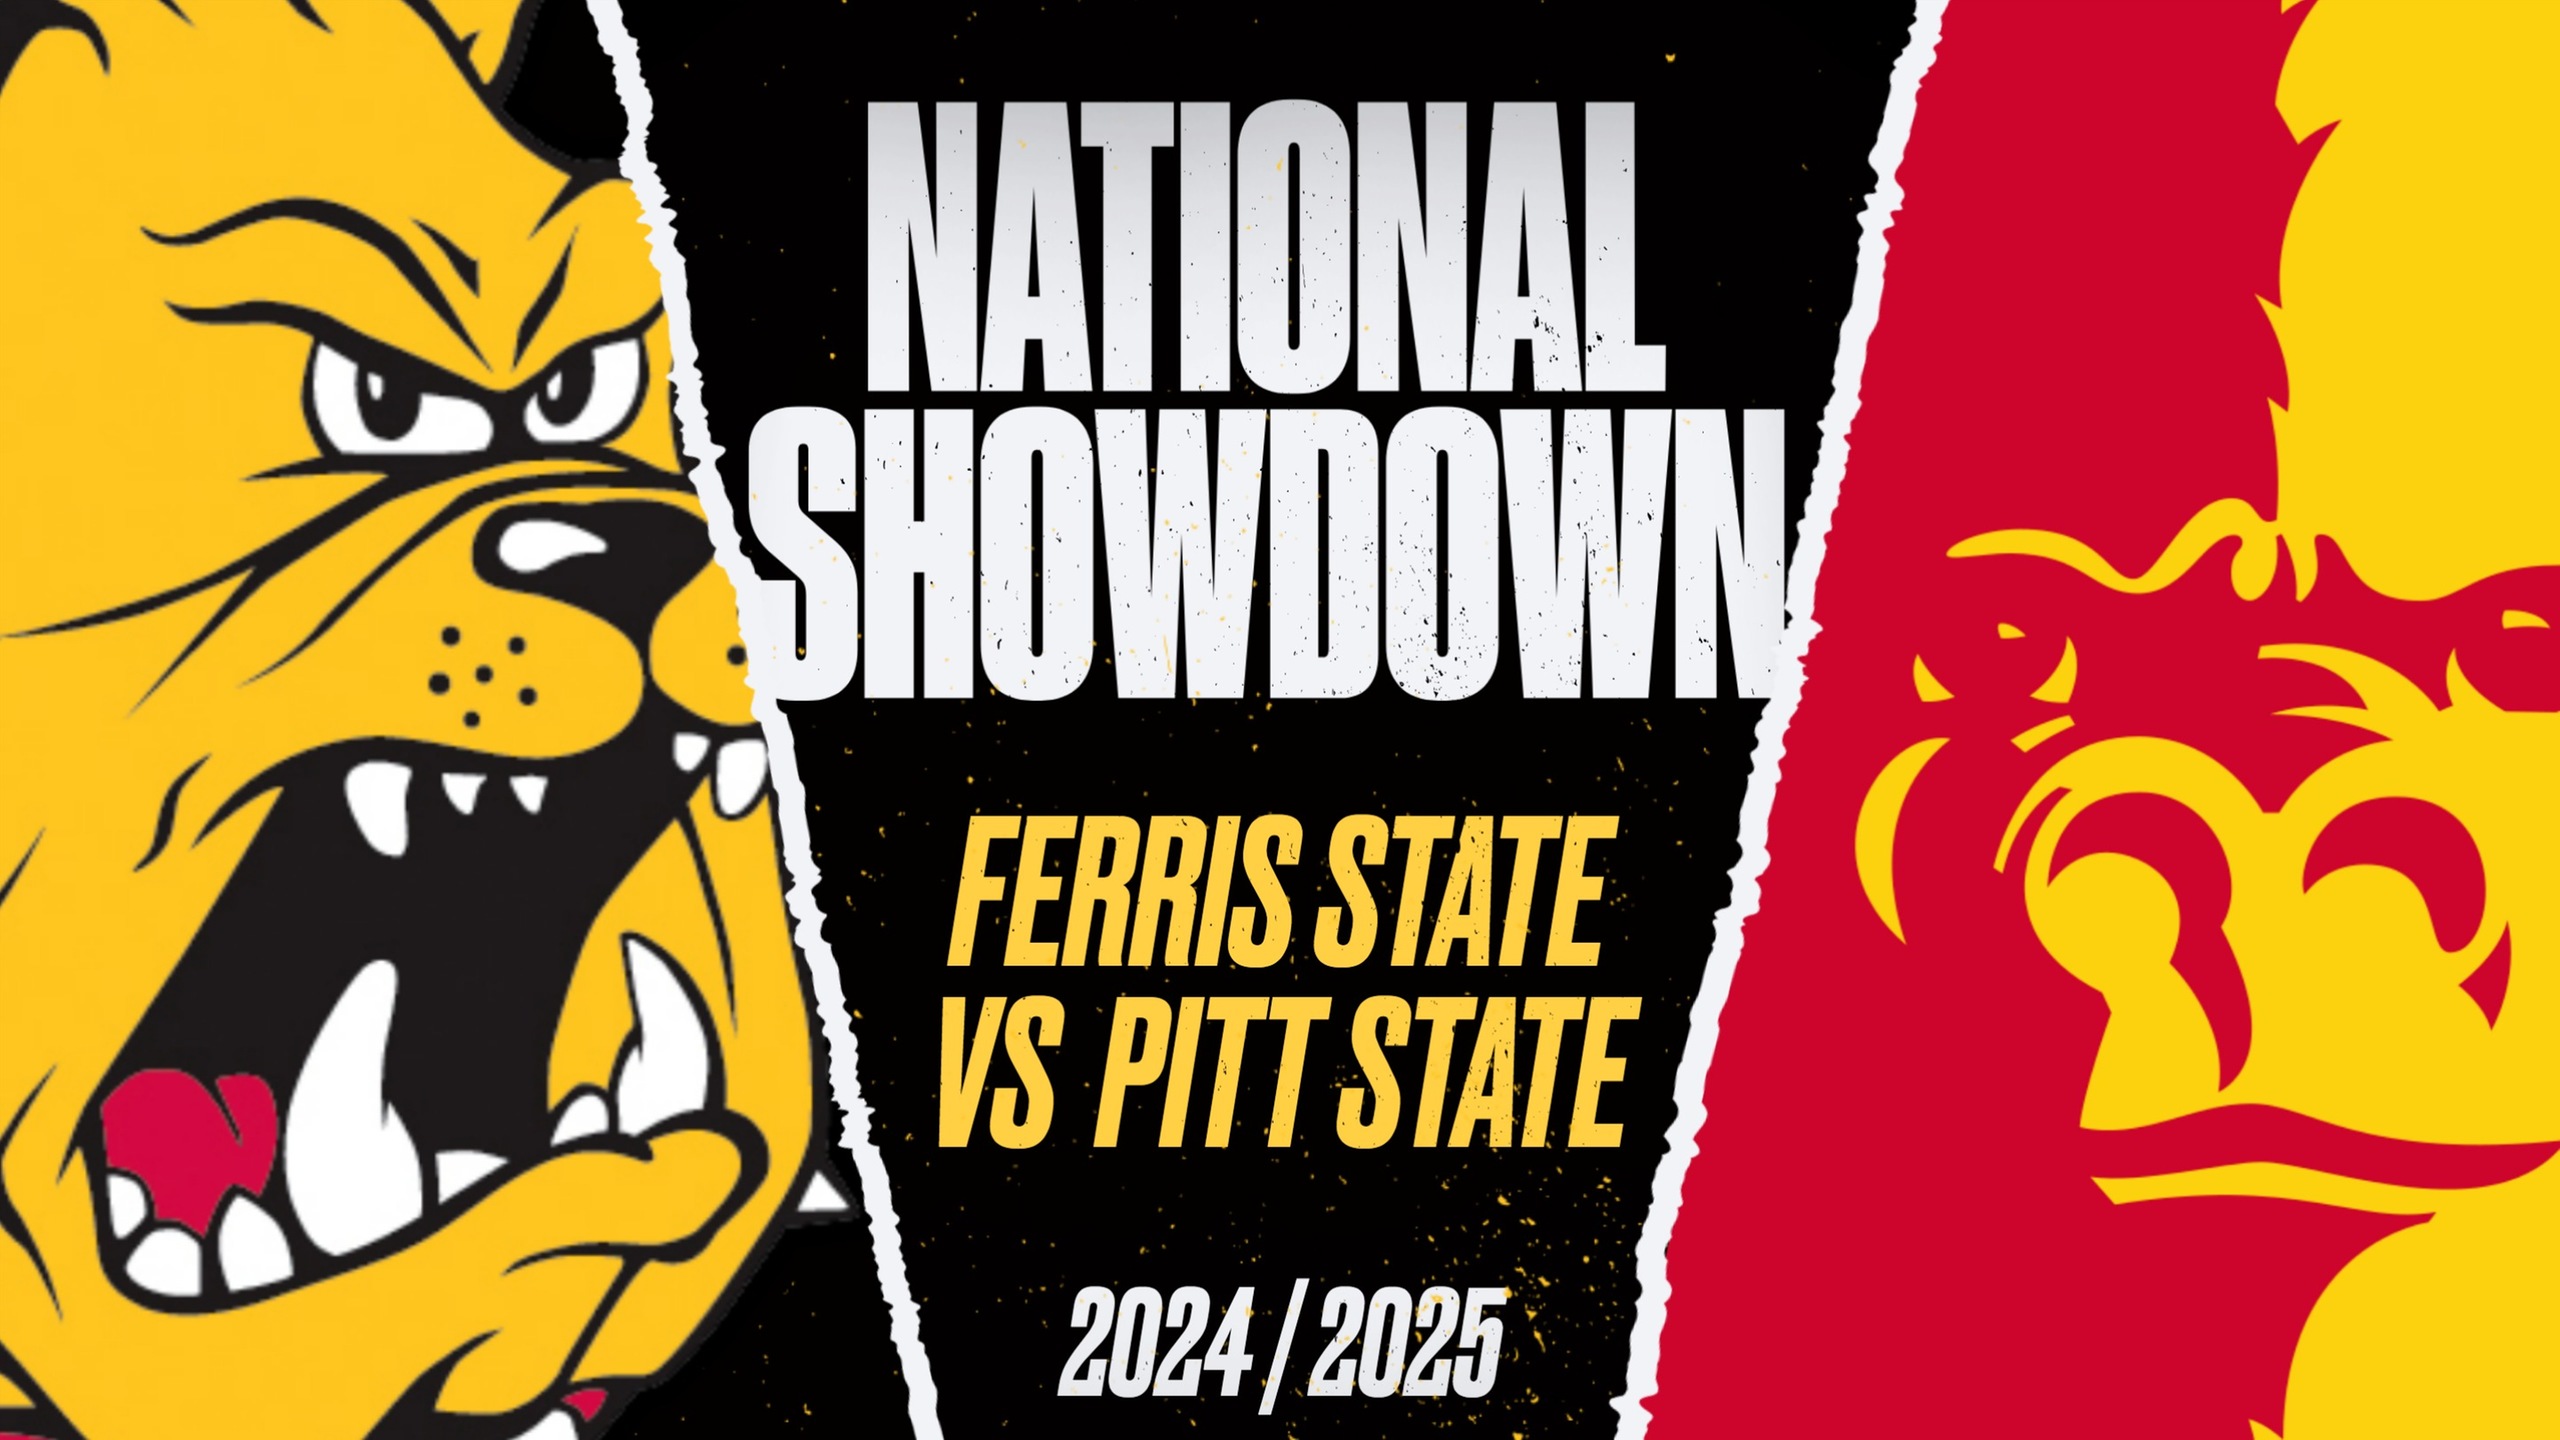 NATIONAL SHOWDOWN! NCAA D2 Powerhouses Ferris State & Pitt State Ink Two-Year Agreement